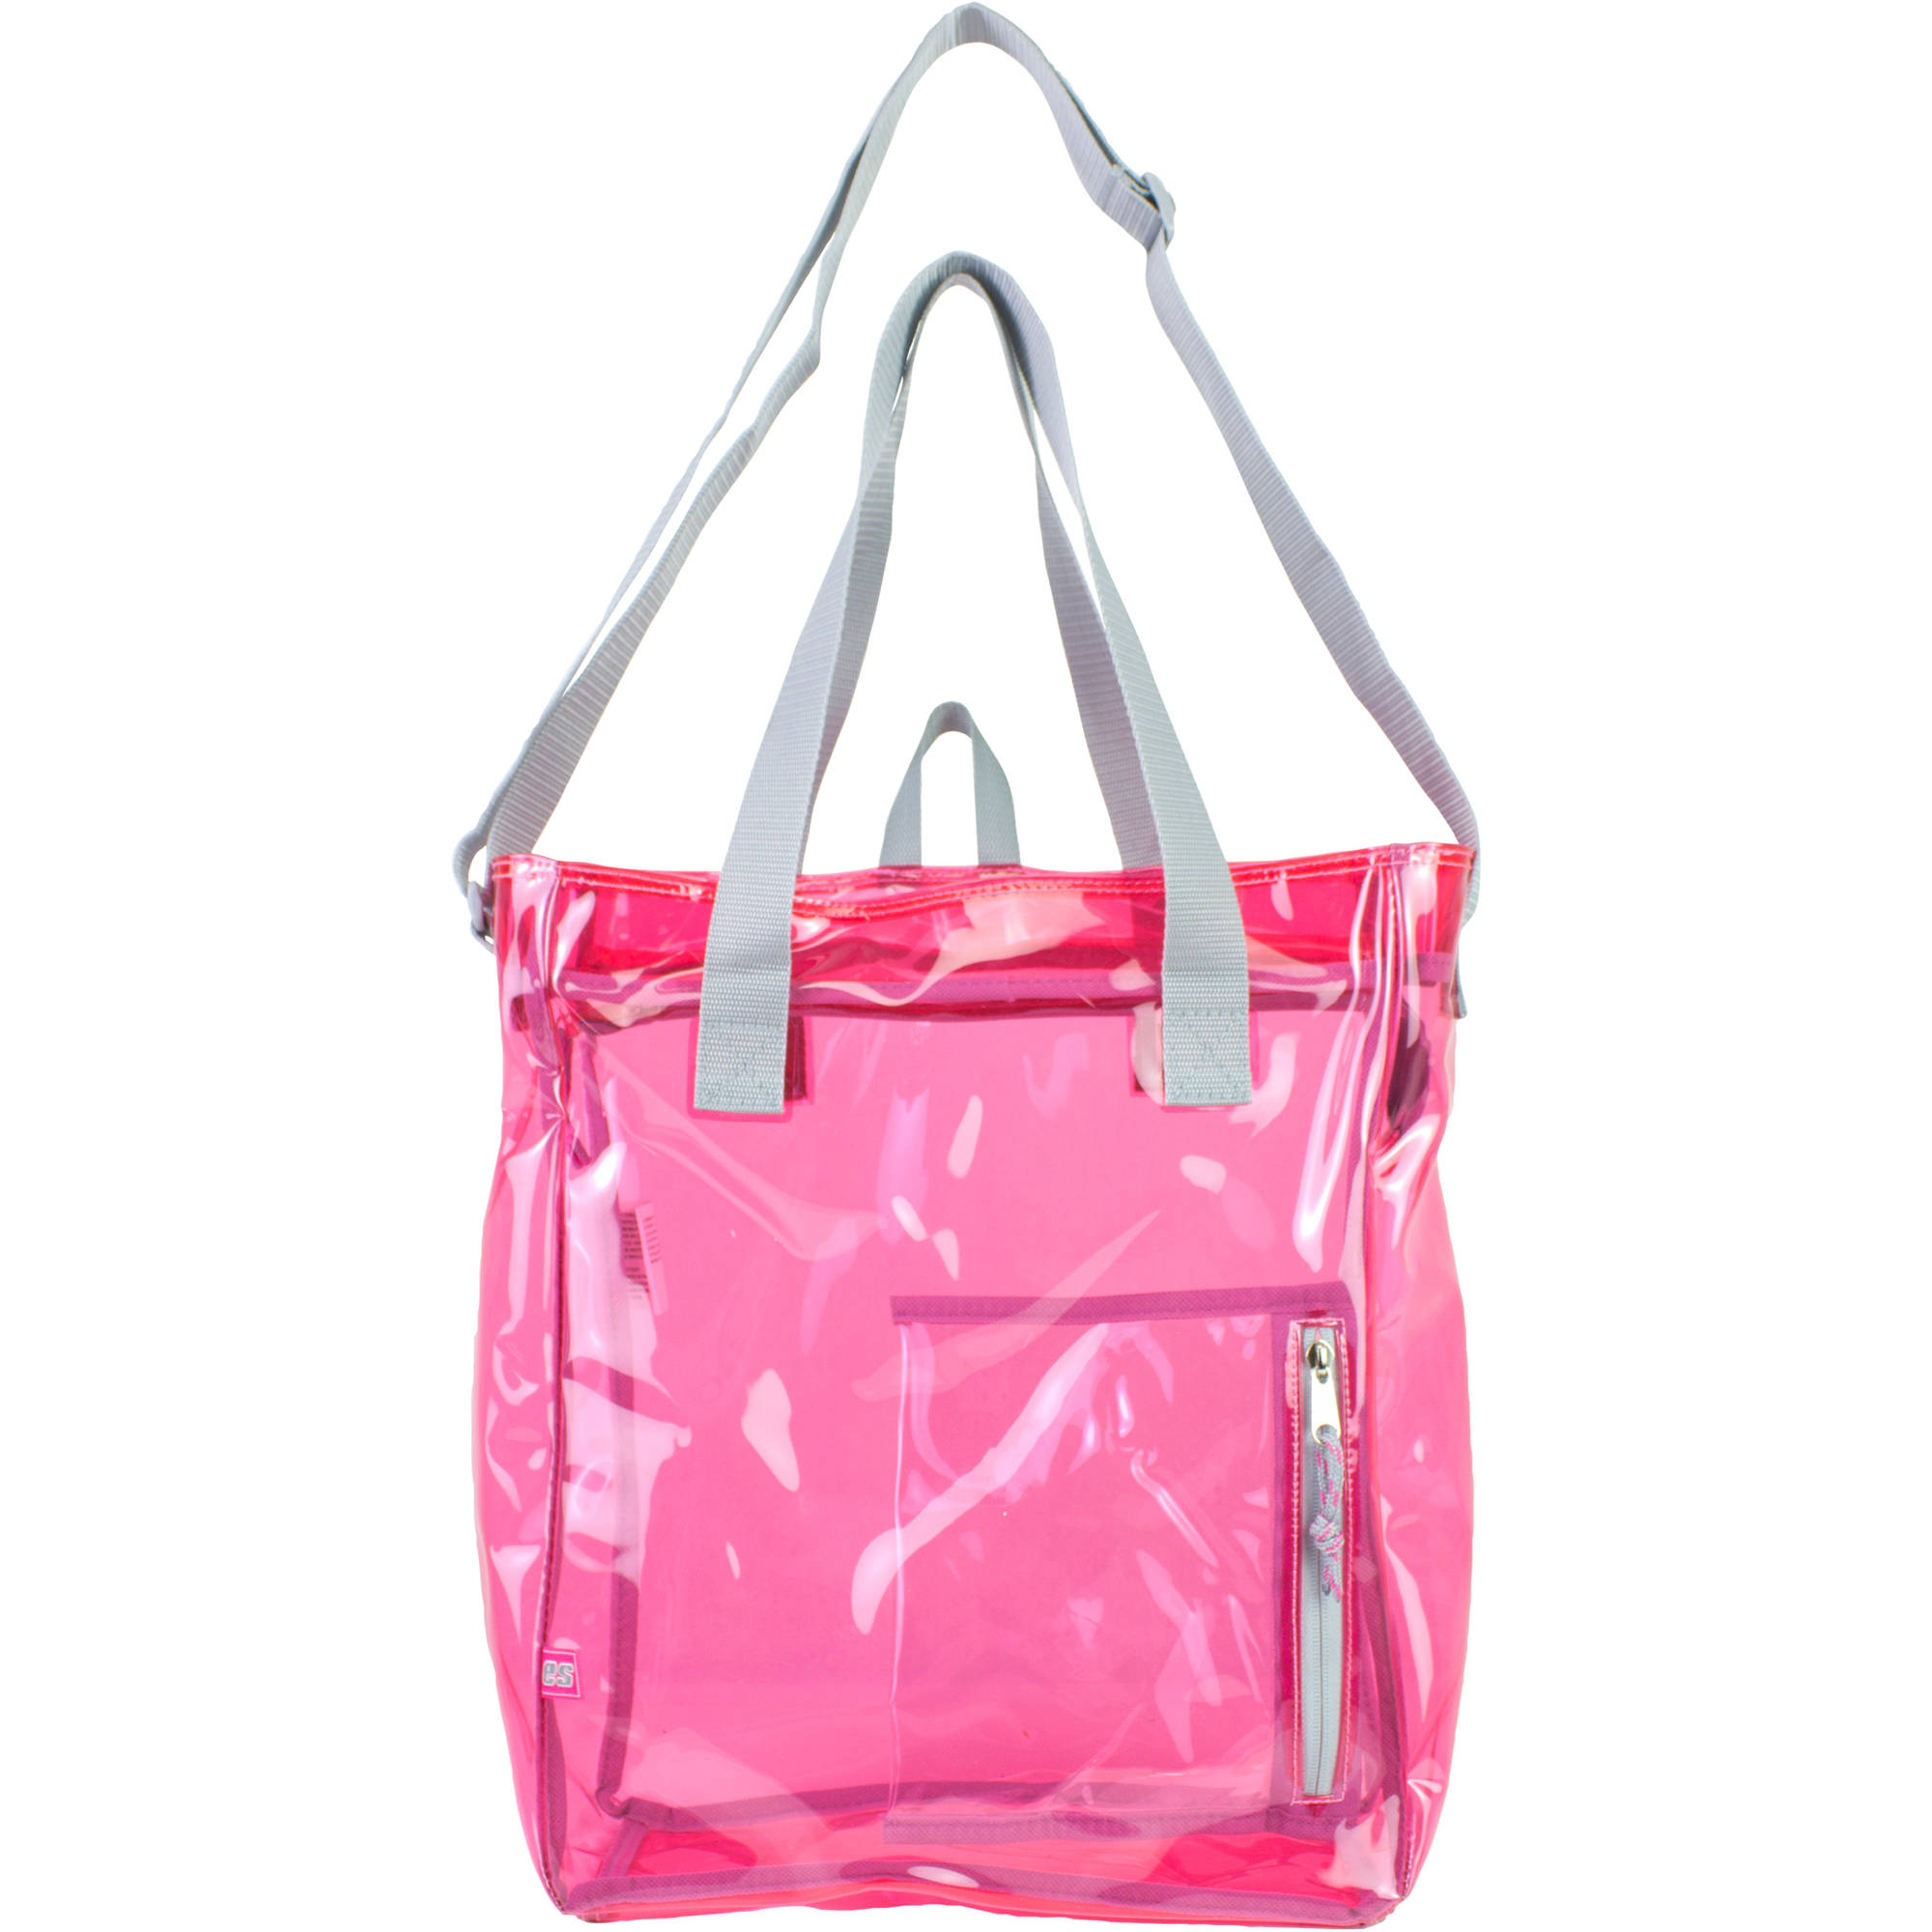 Eastsport Tinted Clear Tote Bag - image 2 of 4